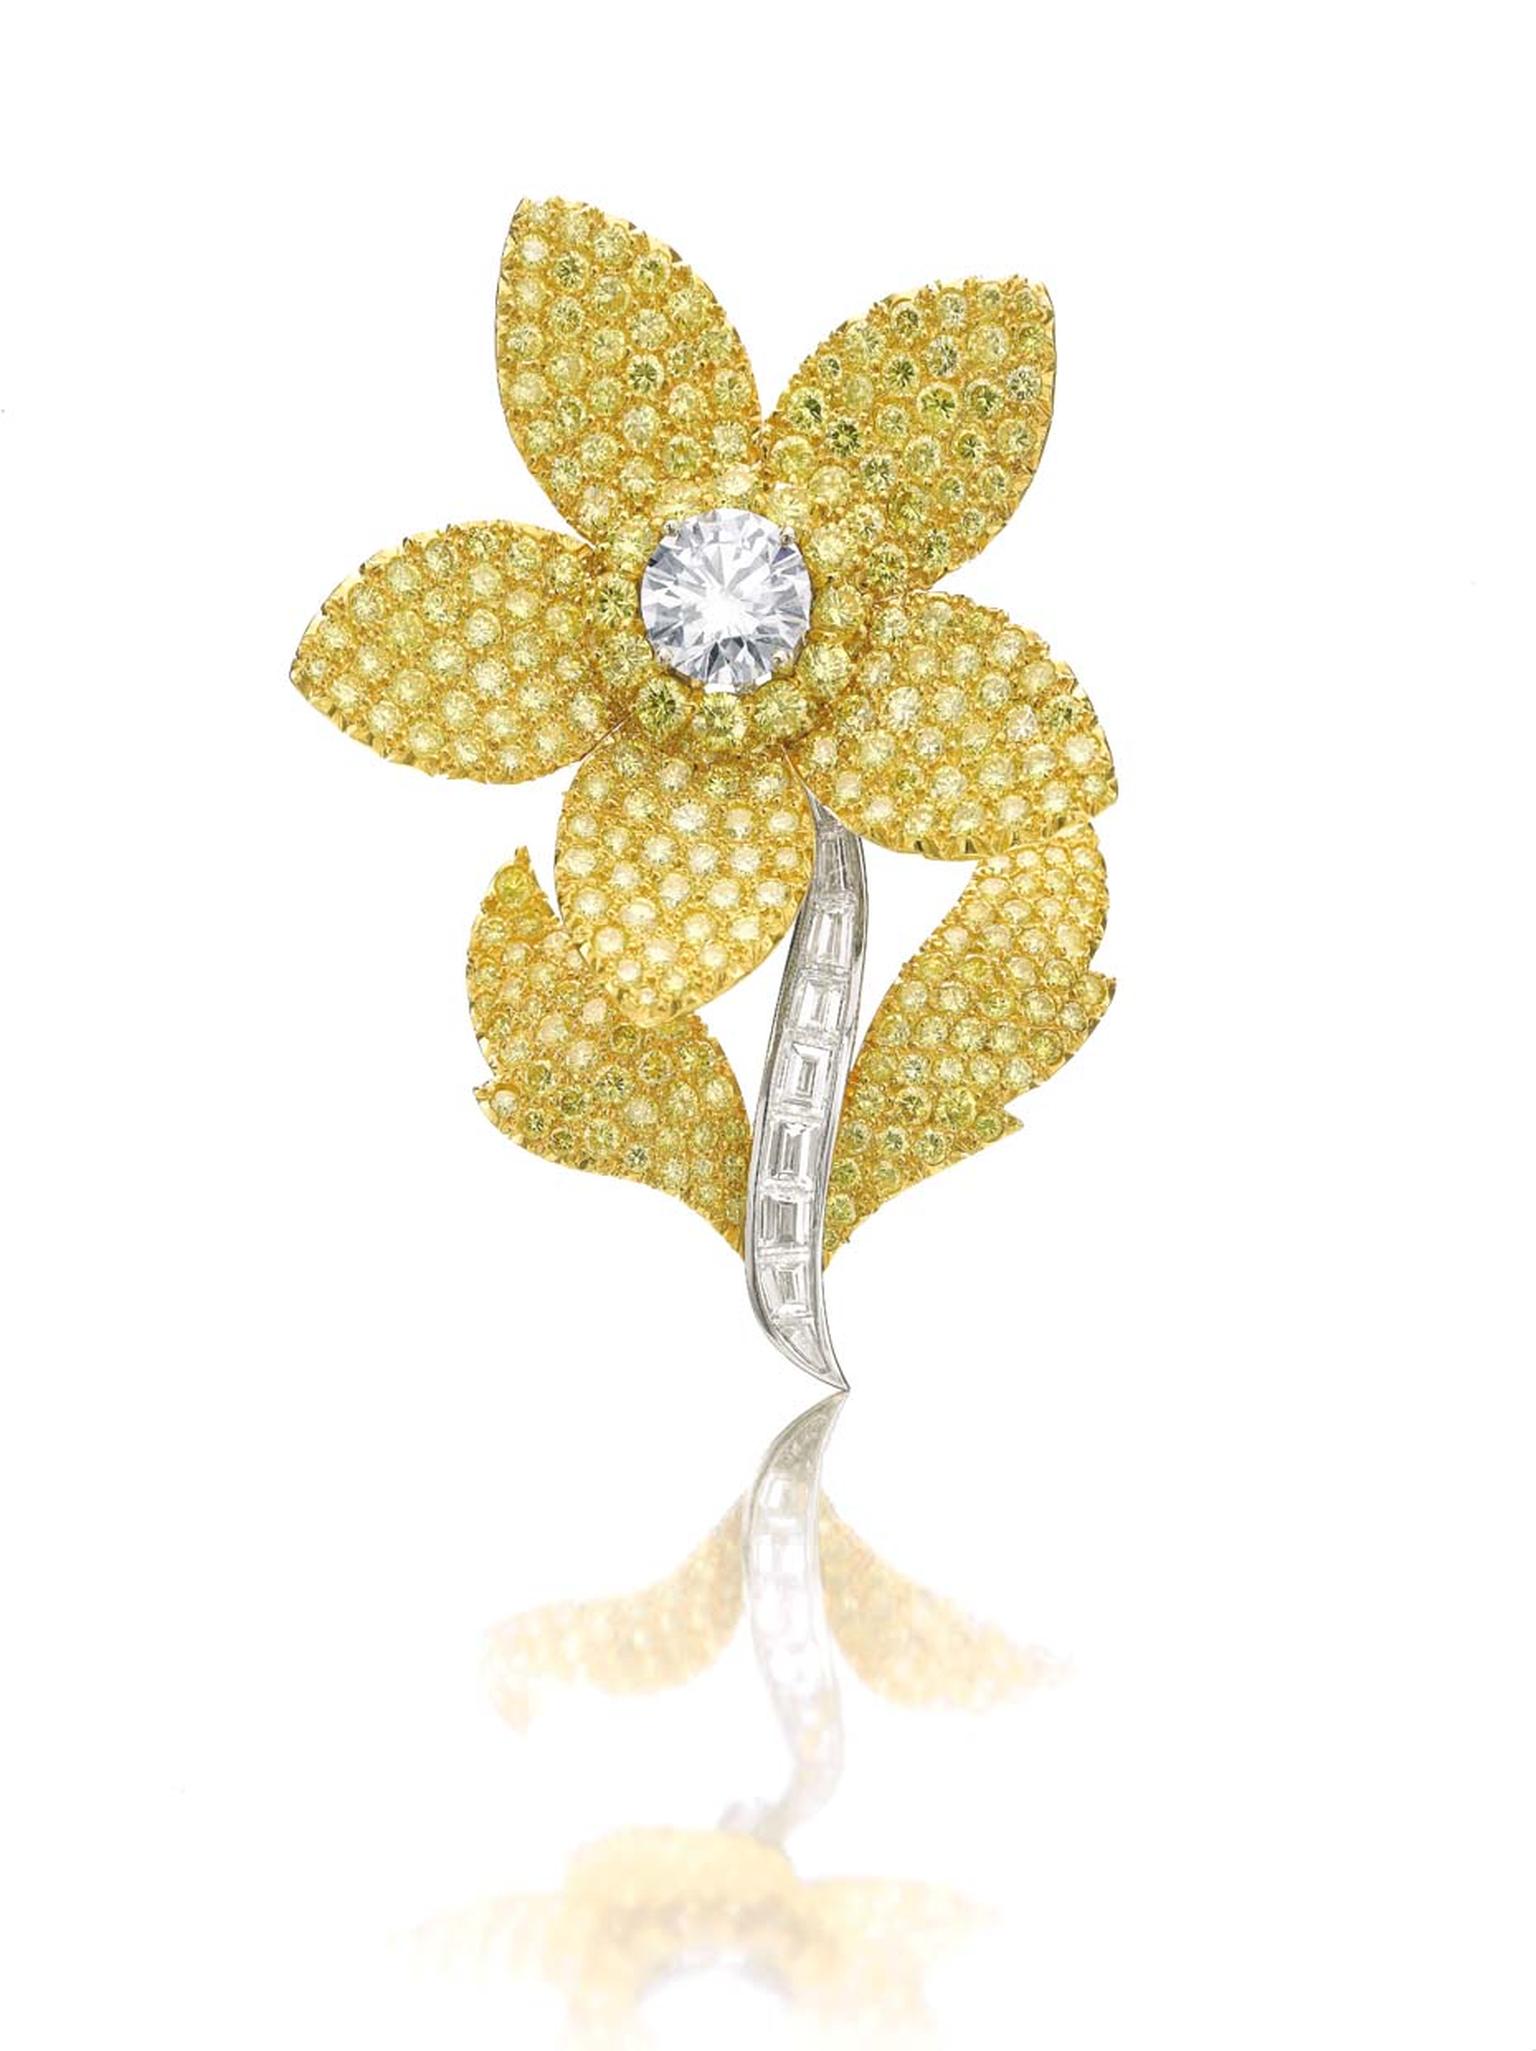 A Graff yellow diamond brooch from Dimitri Mavrommatis’ private collection of jewels will go under the hammer at Sotheby's Geneva sale on 12 November 2014 (estimate: US$100,000-150,000).